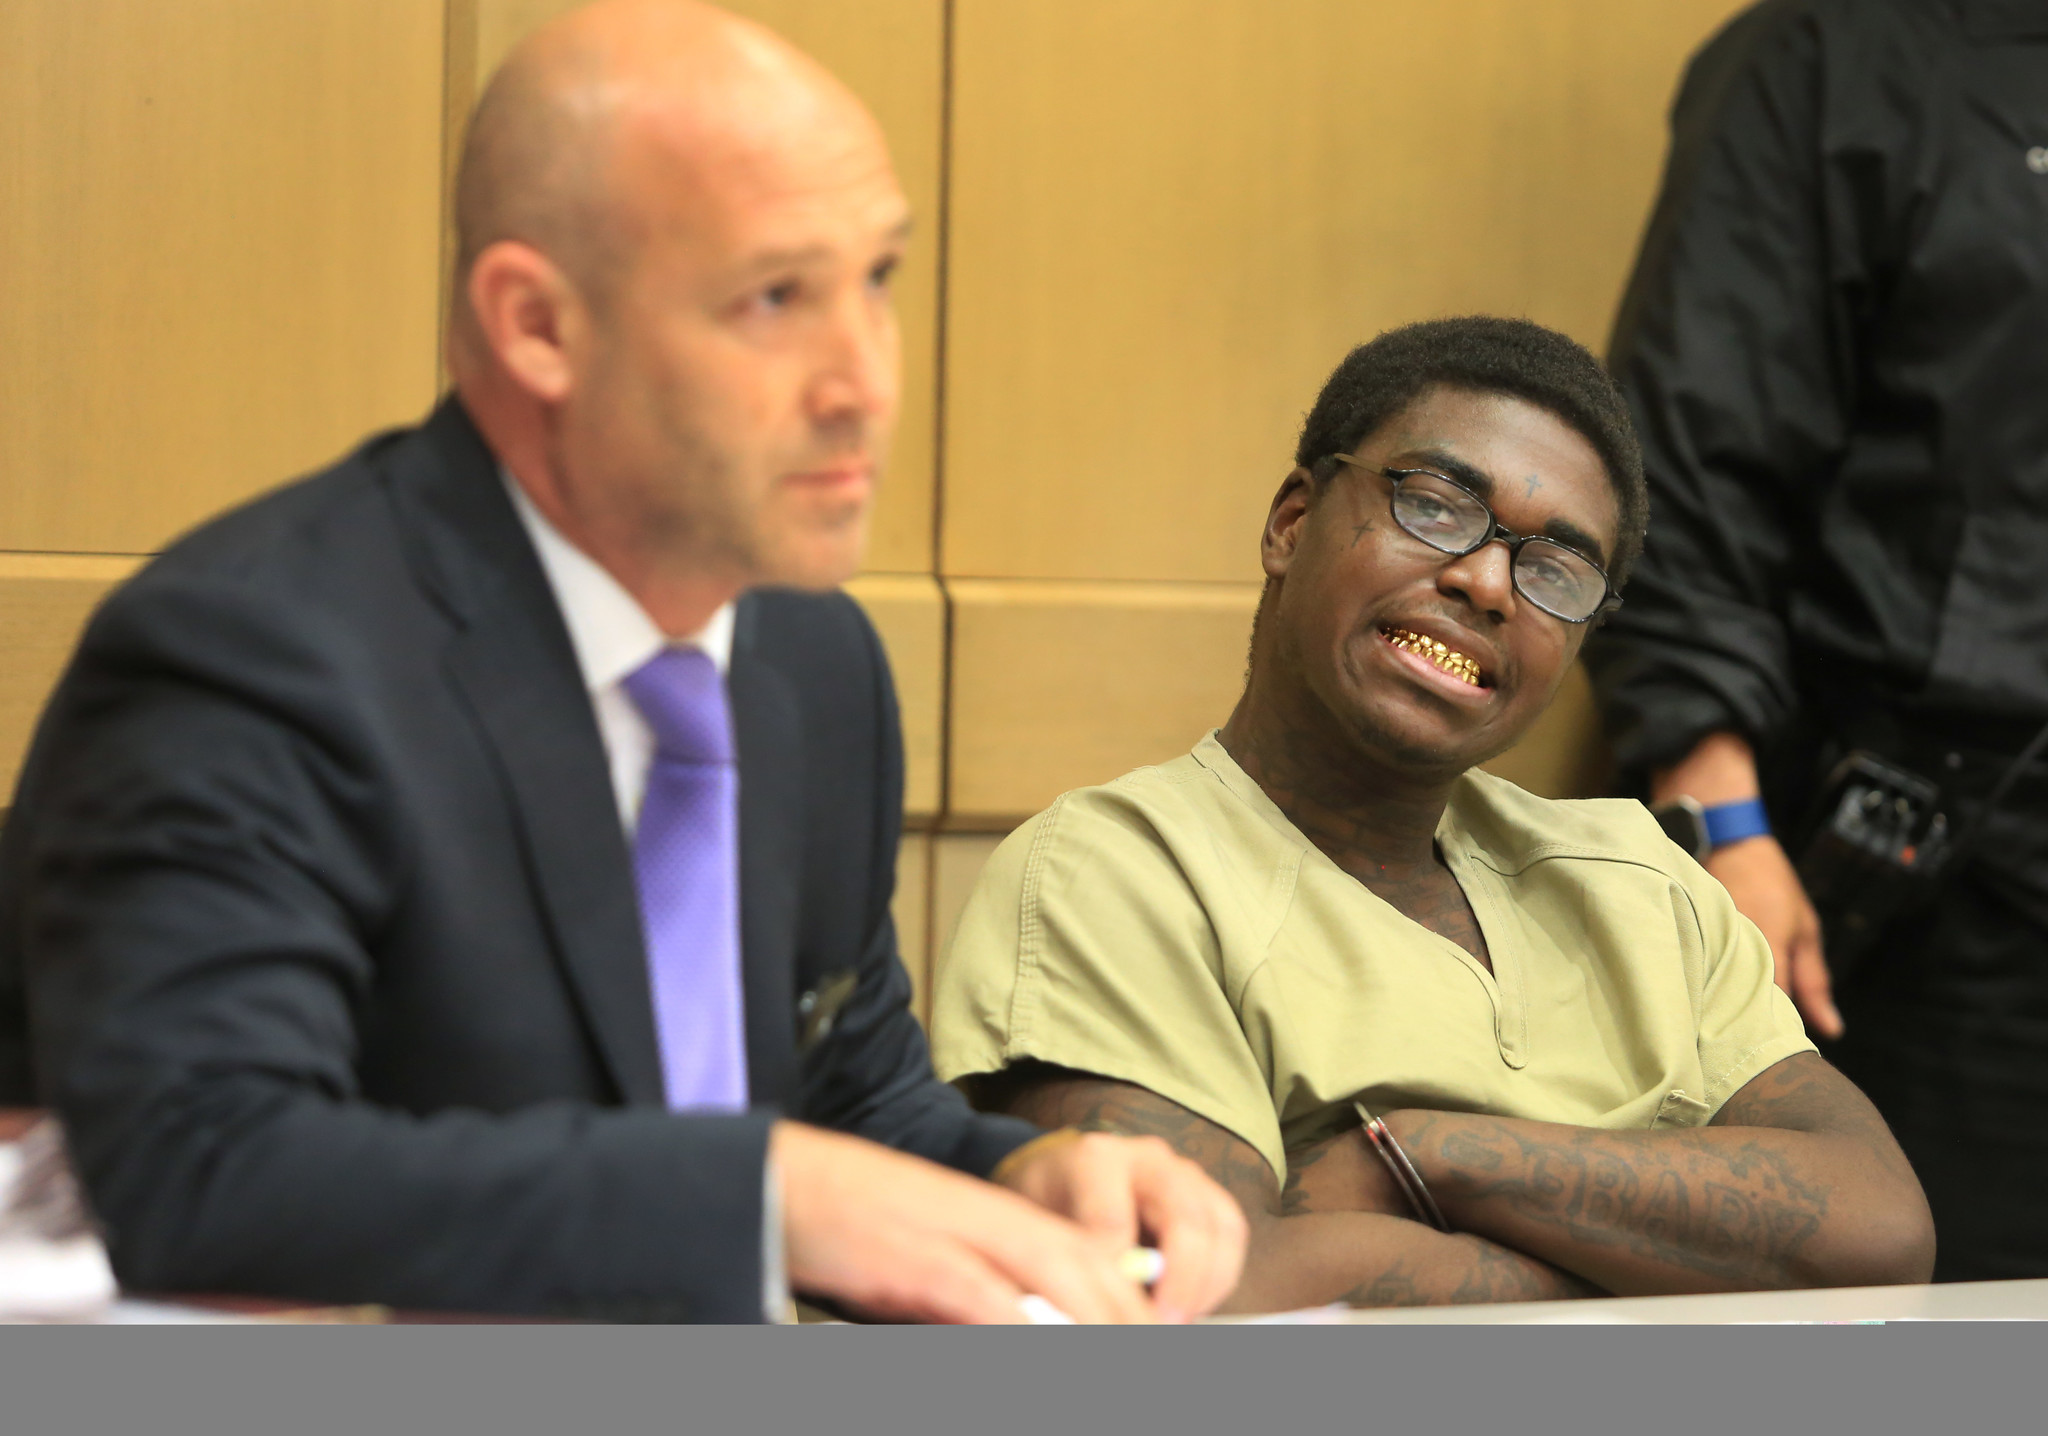 Kodak Black sentenced to 364 days in jail, but could be released in a month - Sun Sentinel2048 x 1436